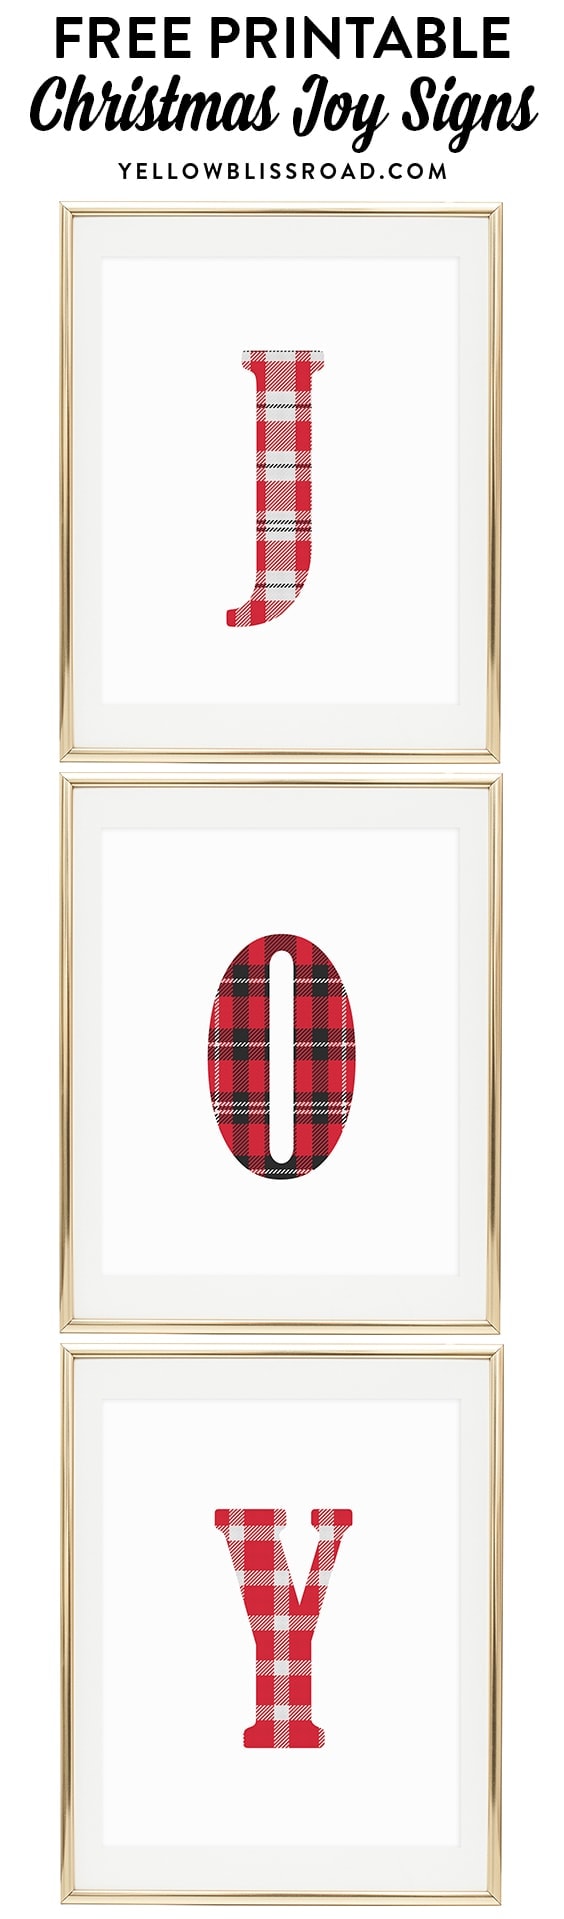 free-printable-christmas-joy-signs-in-plaid-and-white